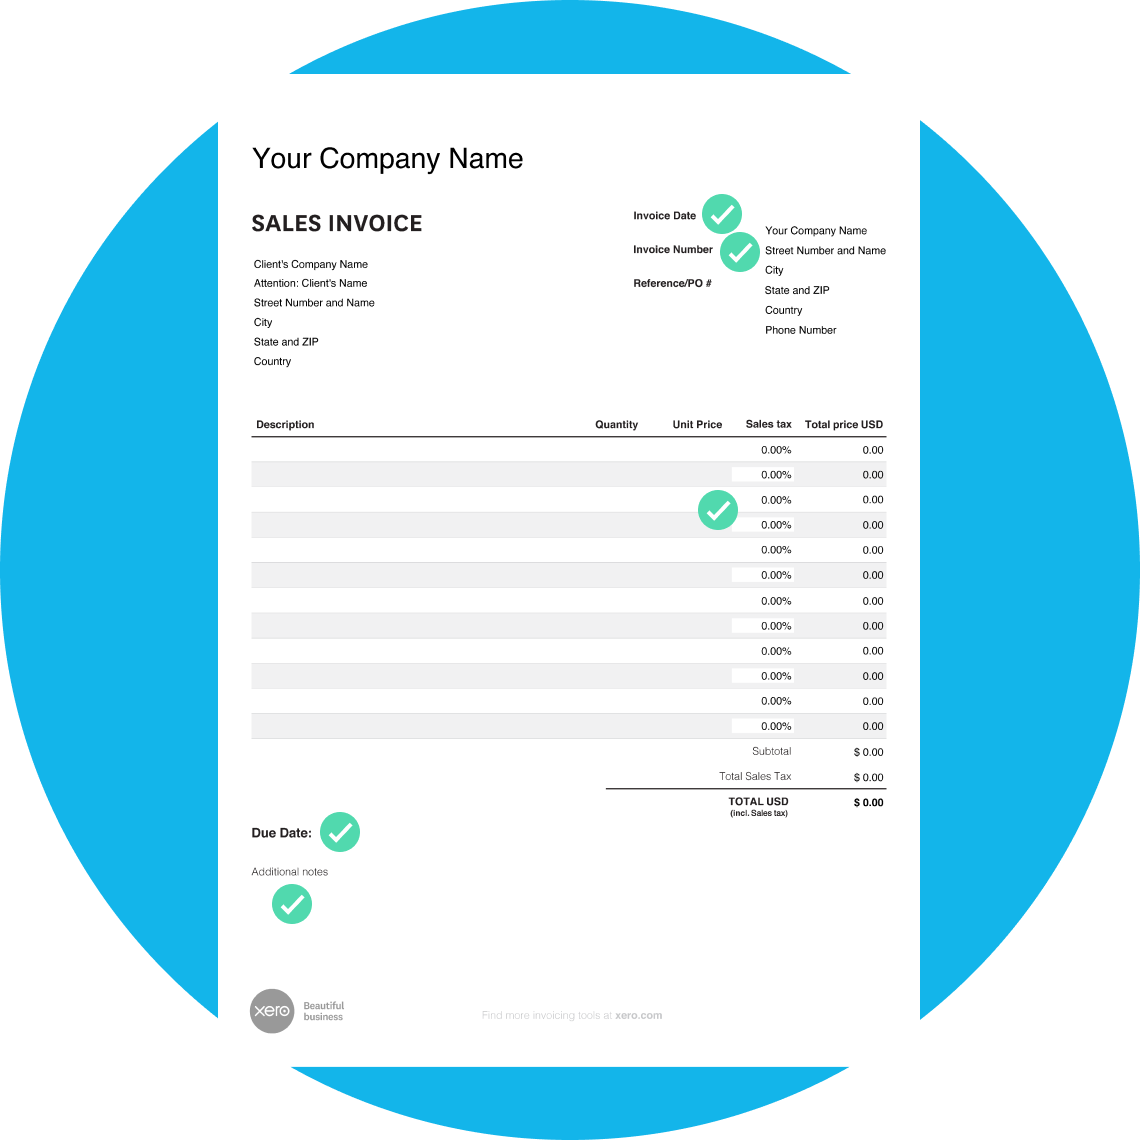 Invoice example with fields ticked